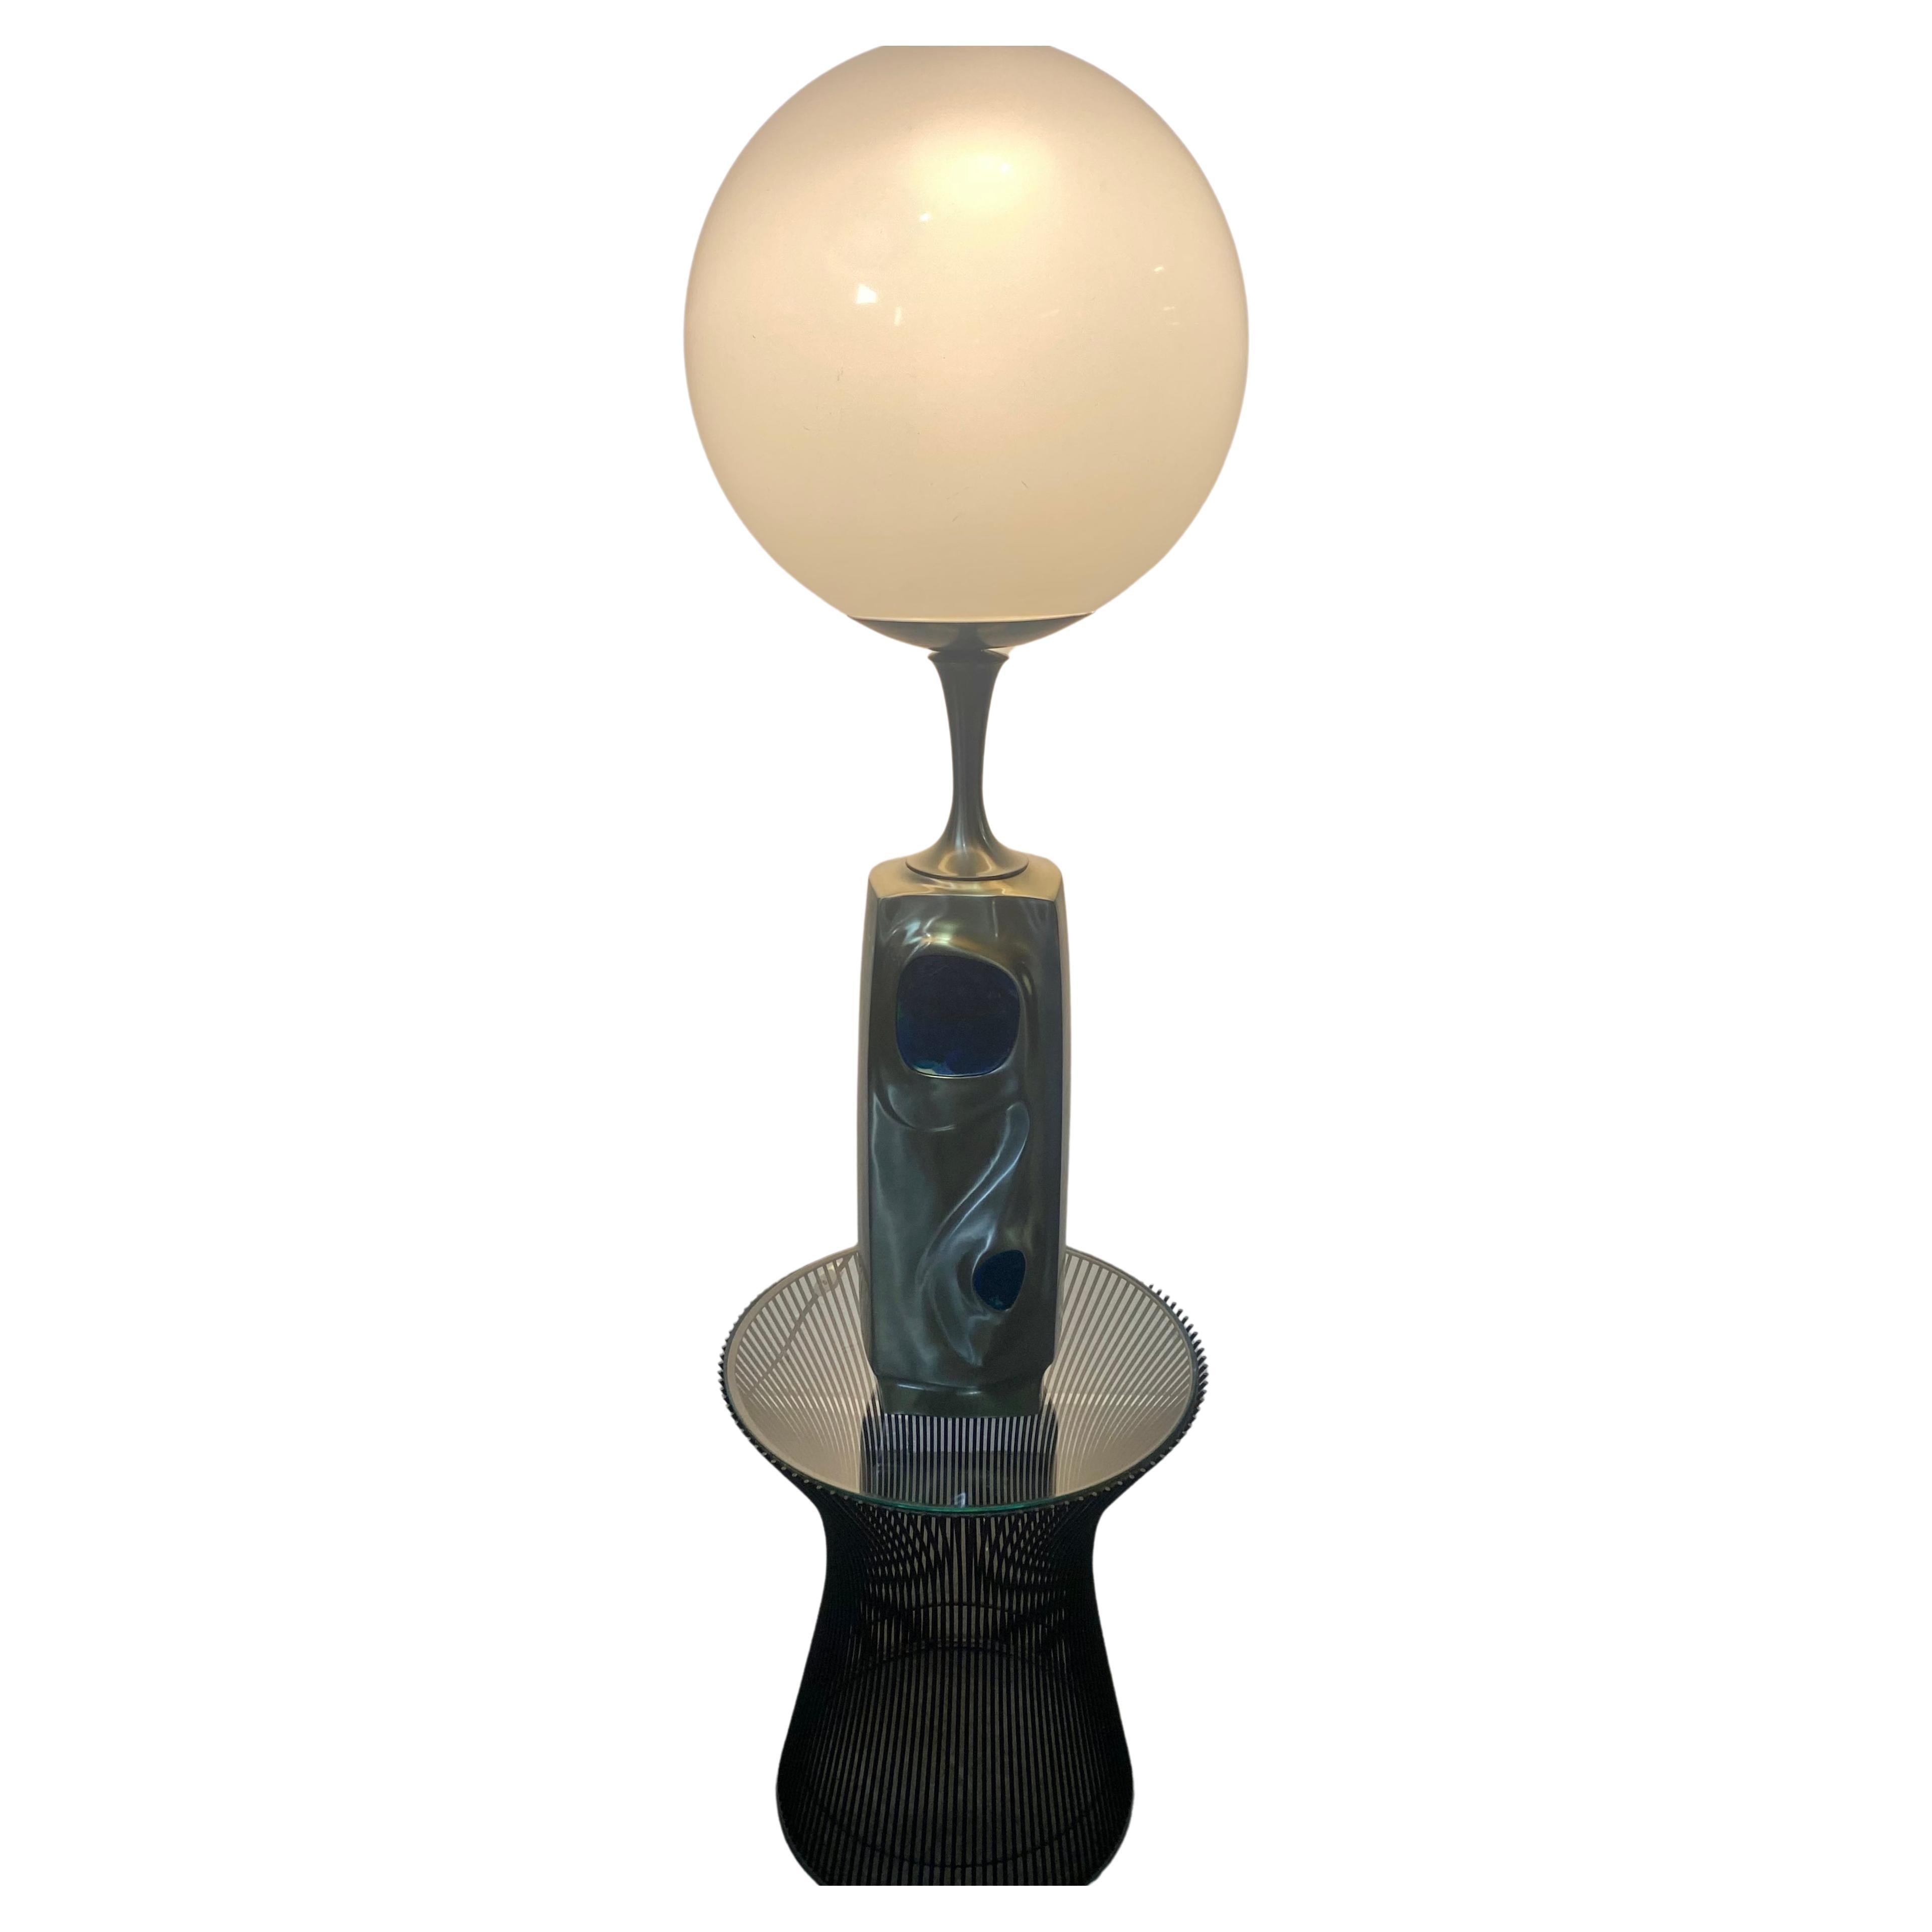 Monumental Richard Barr for Laurel lamp Co. Brutalist table lamp. space age design. One of a kind, This lamp has been modified to be used in a Space Age photo shoot, Harp removed, Top aluminum and round plastic sphere has been added. Much better